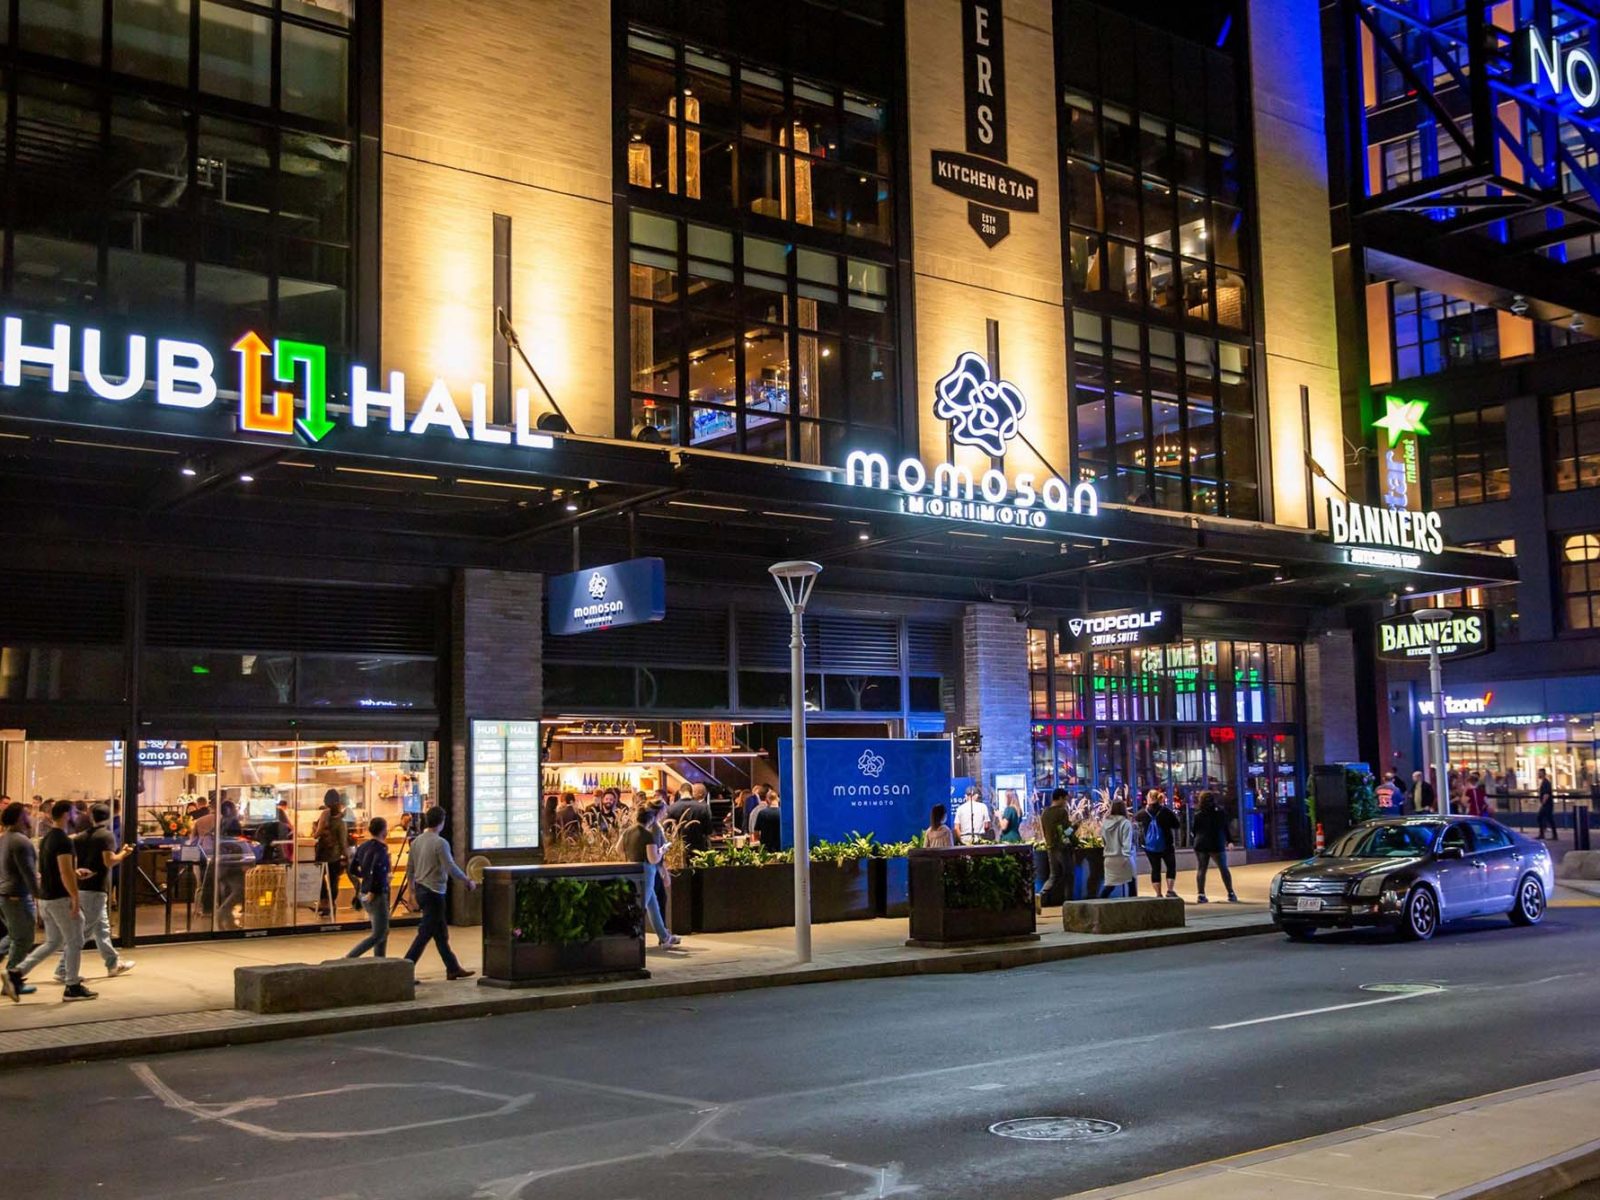 Hub Hall - North Station - #boston MA - How To Get There - Food Restaurants  - Concerts - TD Garden 